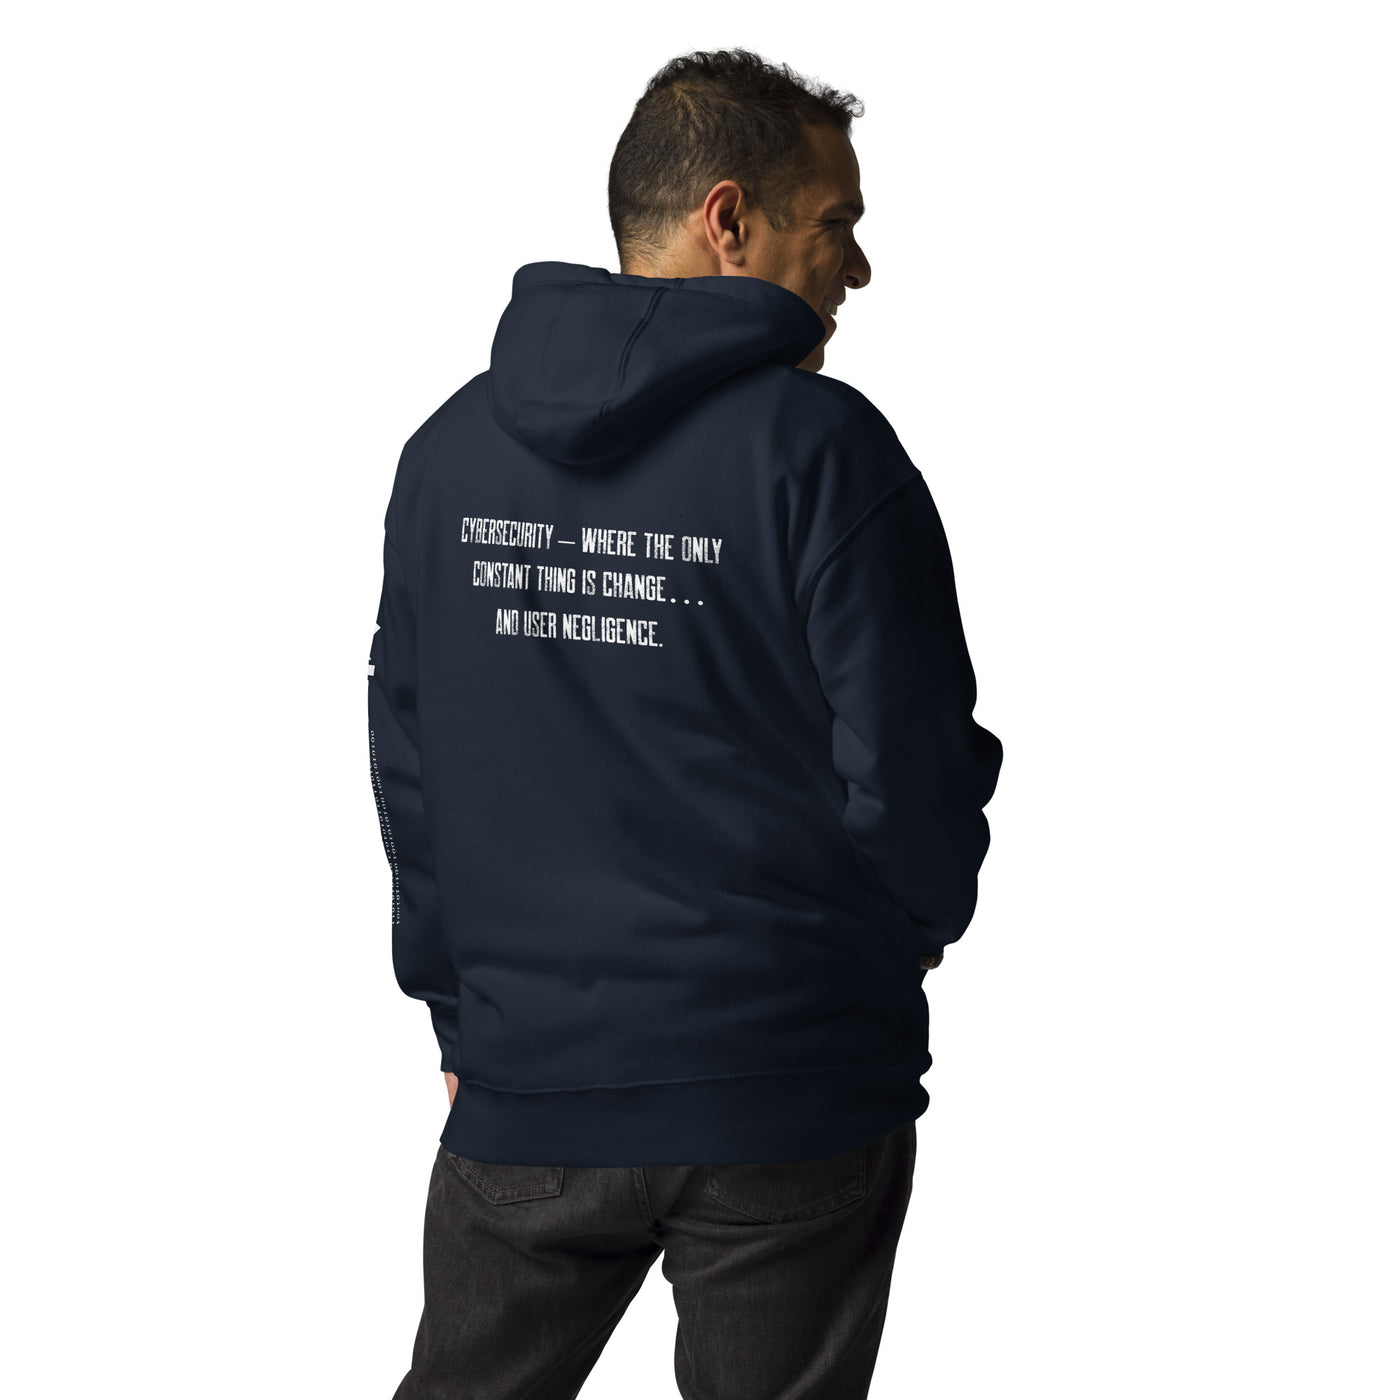 Cybersecurity where the only constant thing is change and user negligence - Unisex Hoodie ( Back Print )